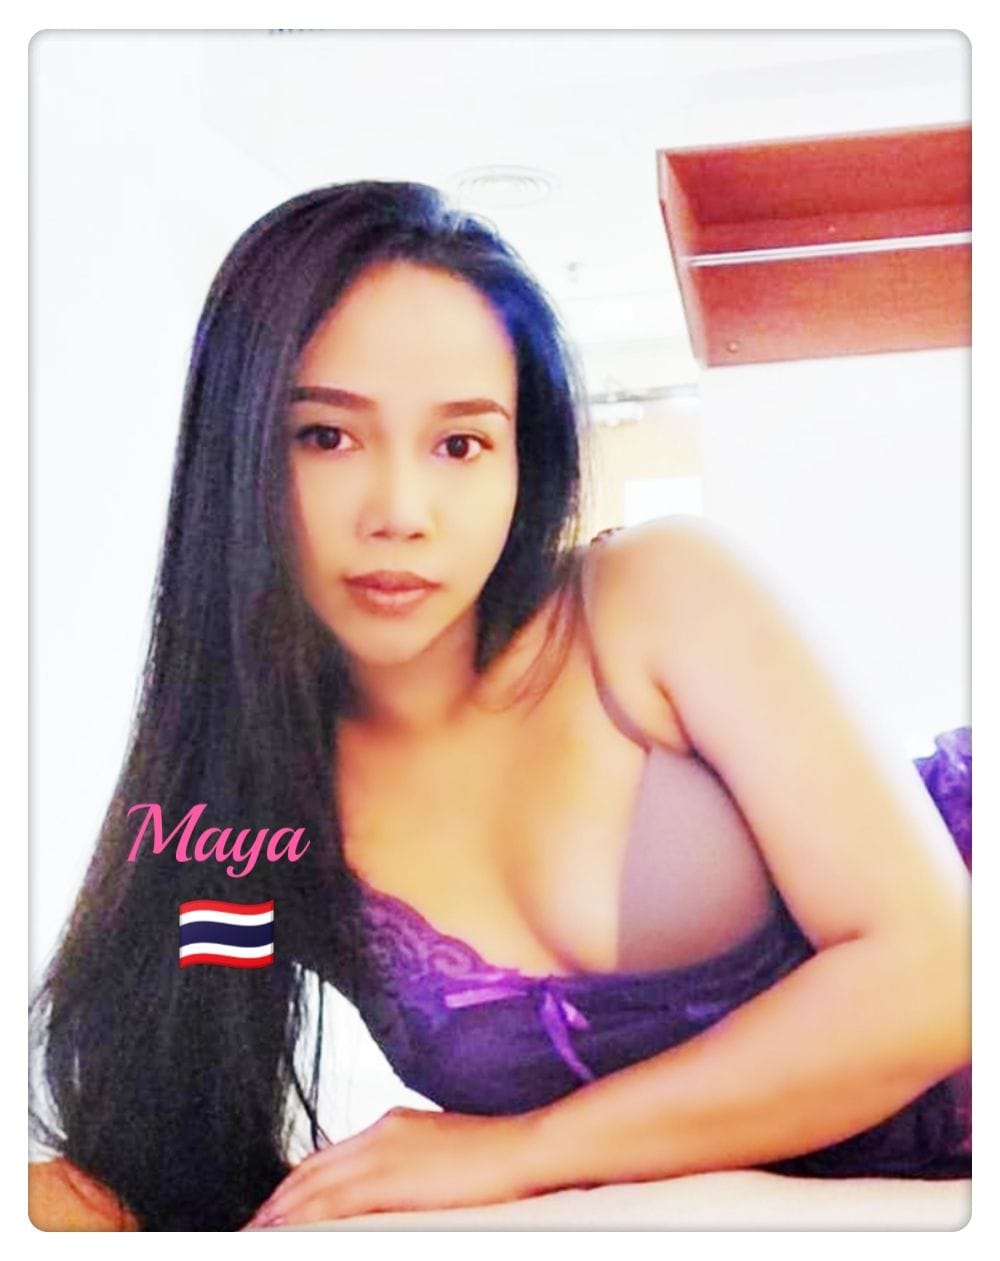 Outcall Incall Service in KL